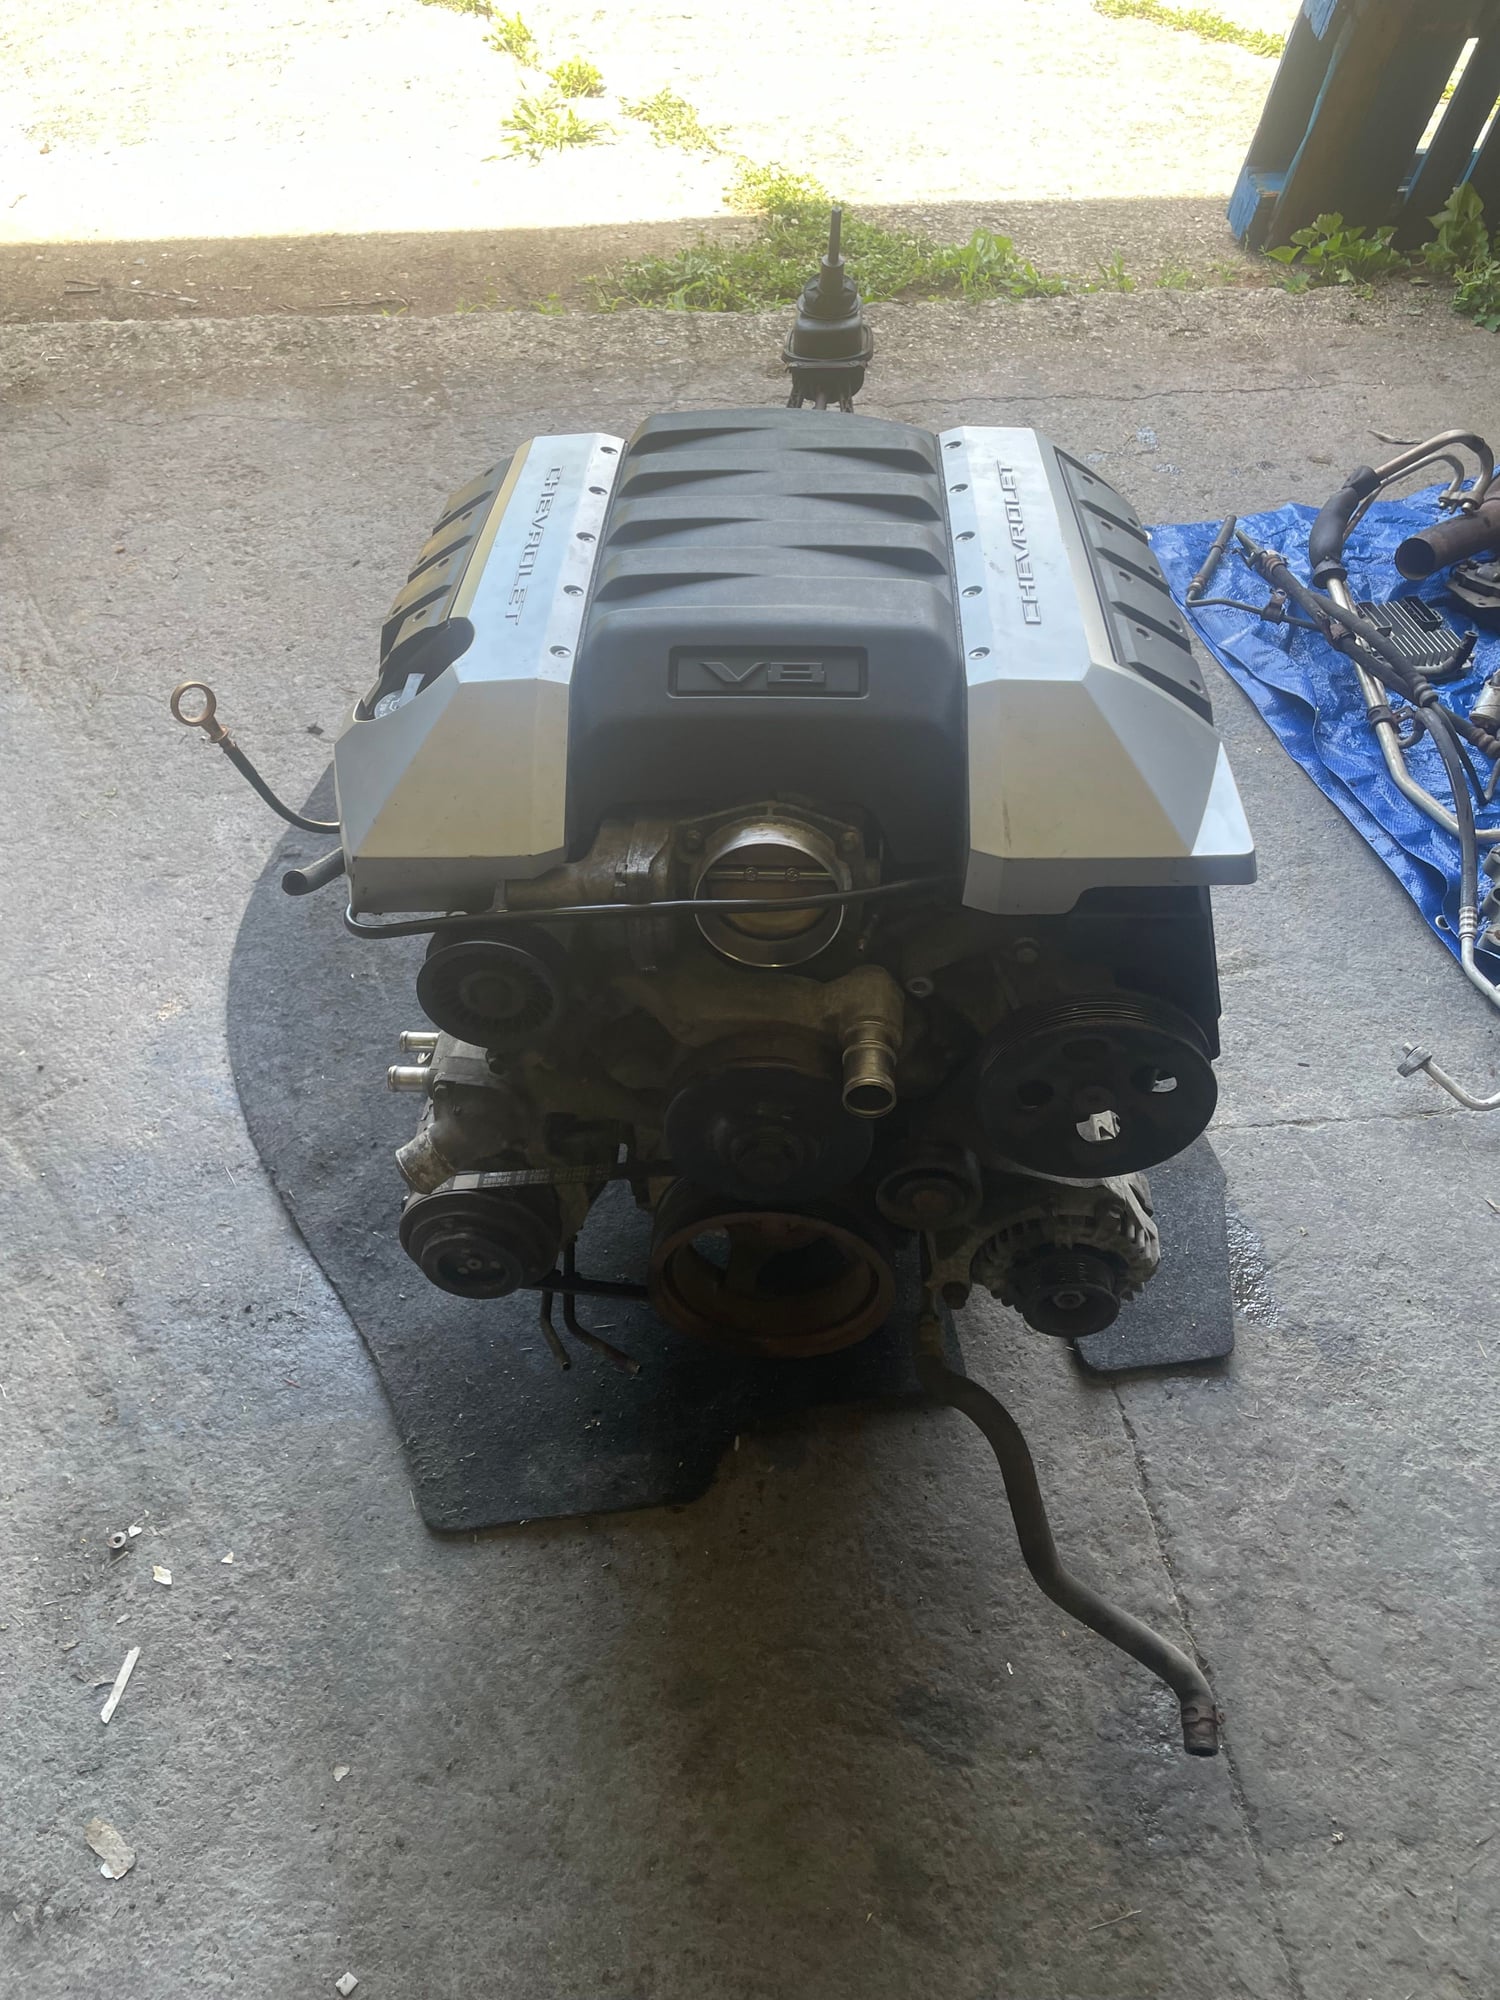 Engine - Complete - LS3 TR6060 complete pull out with extras - Used - 2010 to 2015 Chevrolet Camaro - Indianapolis, IN 46217, United States